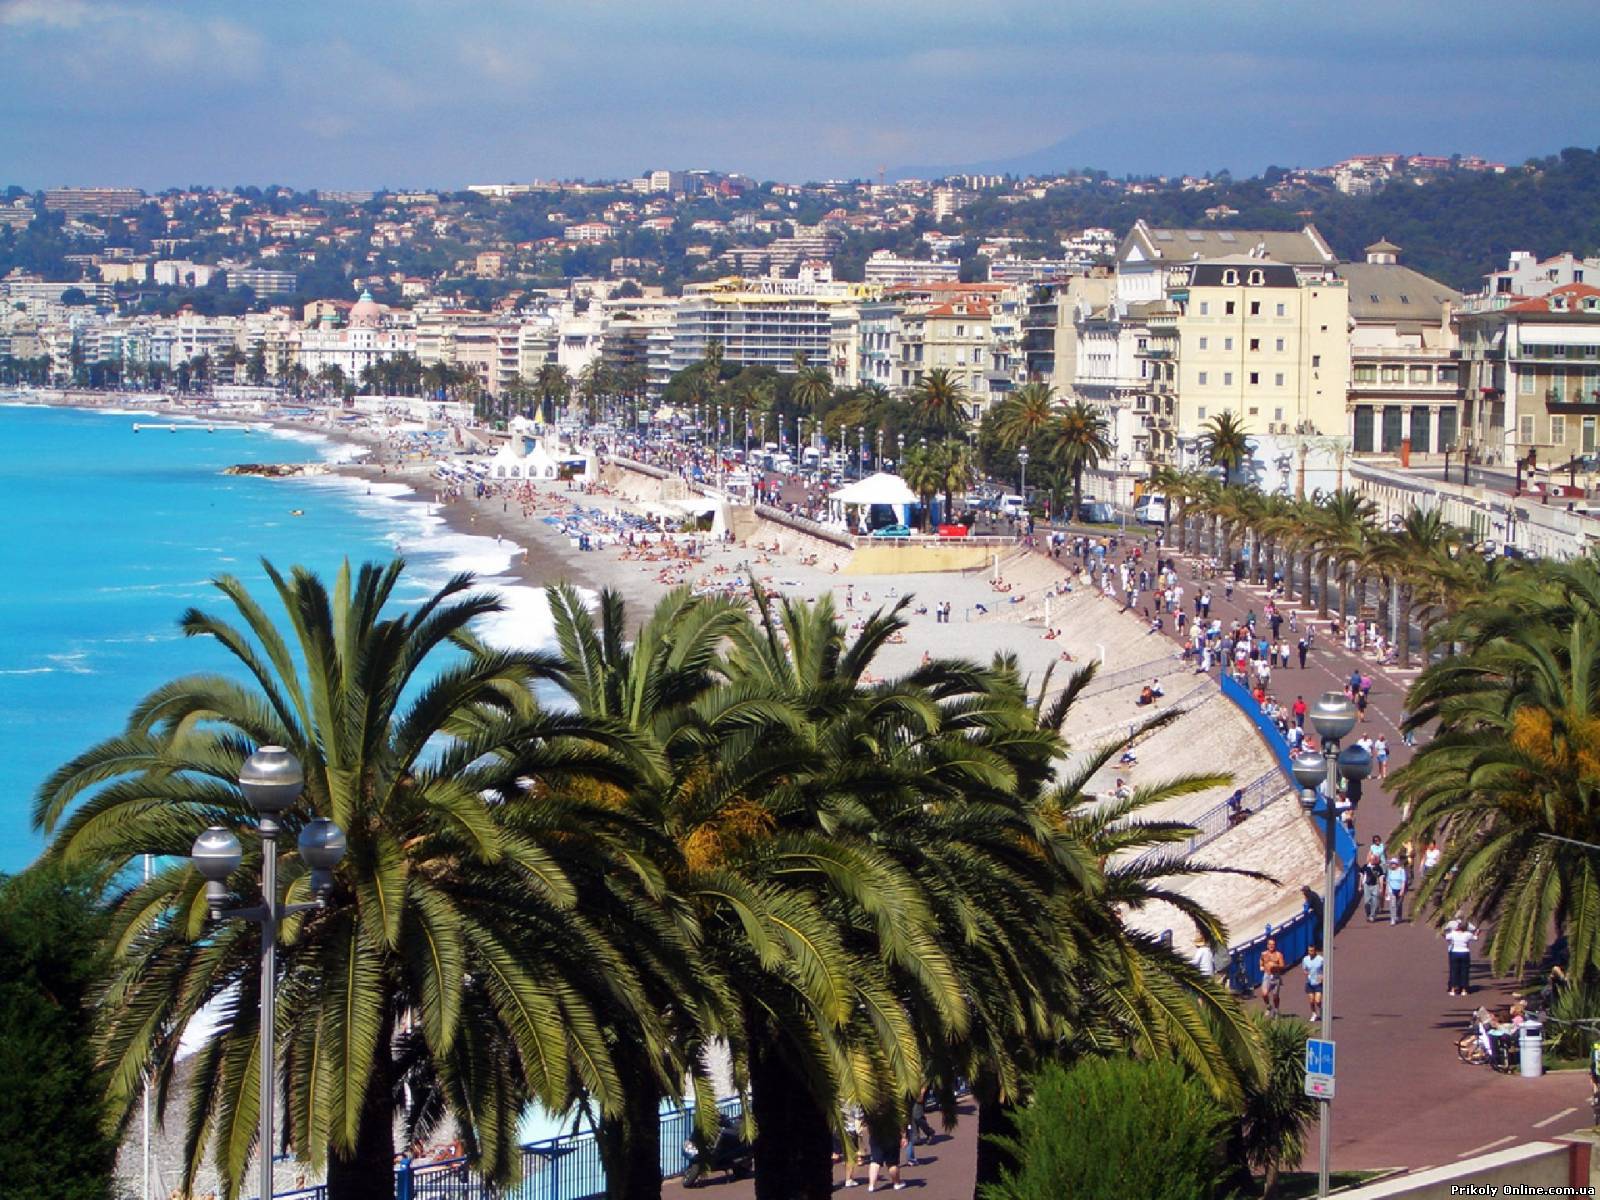 Beach in Nice, France wallpaper and image, picture